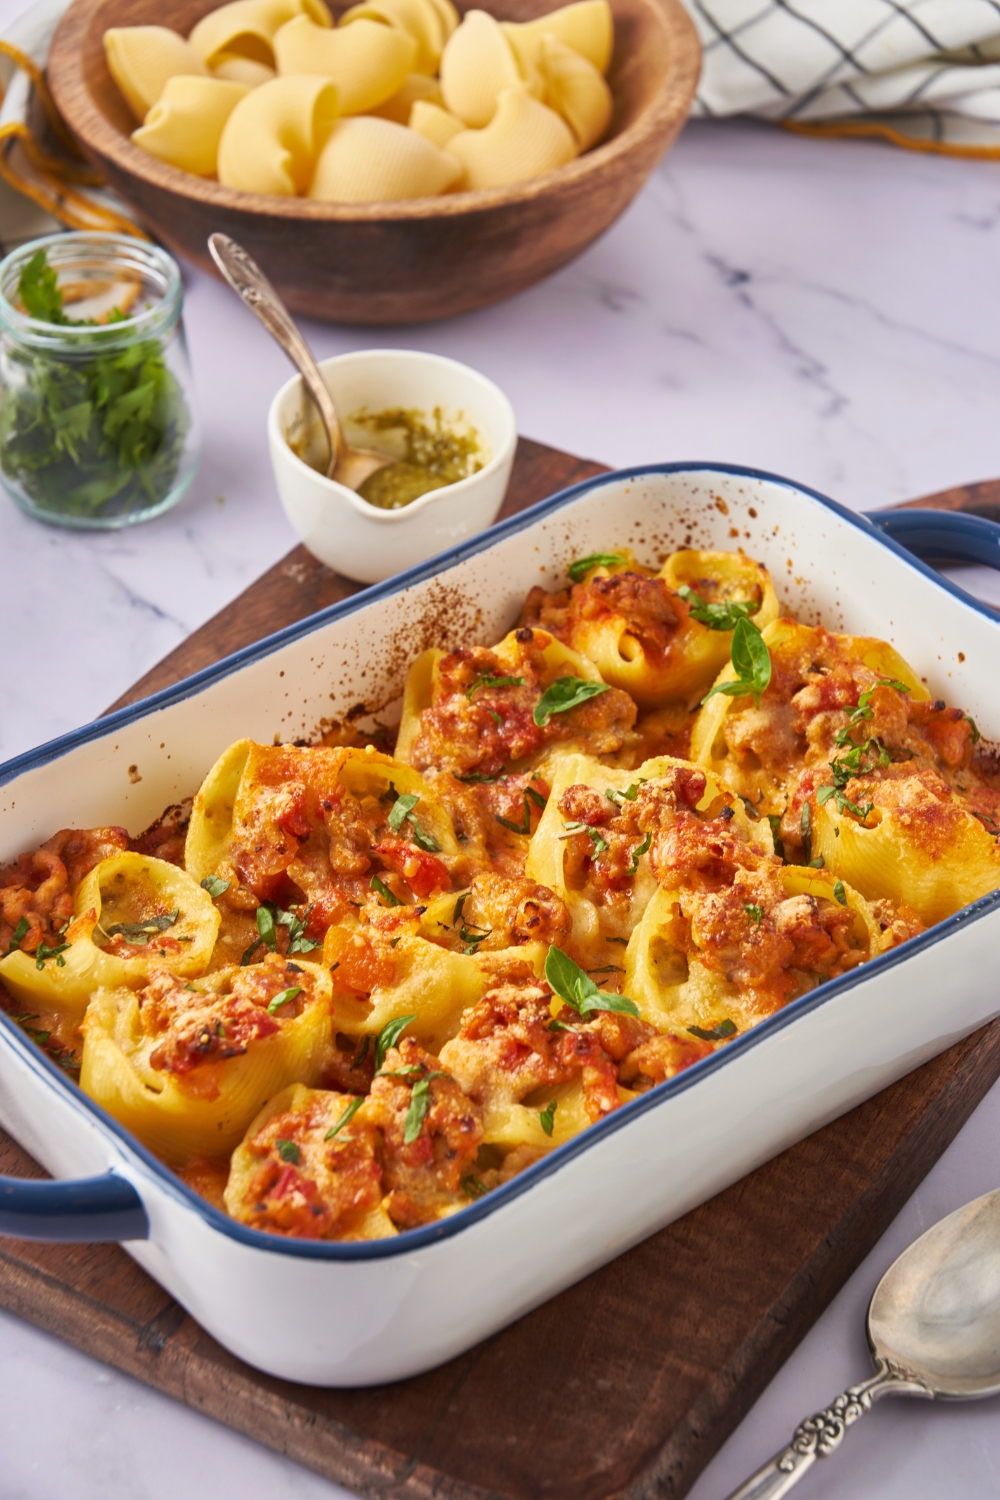 Freshly baked stuffed shells covered in golden brown melted cheese and garnished with fresh basil.